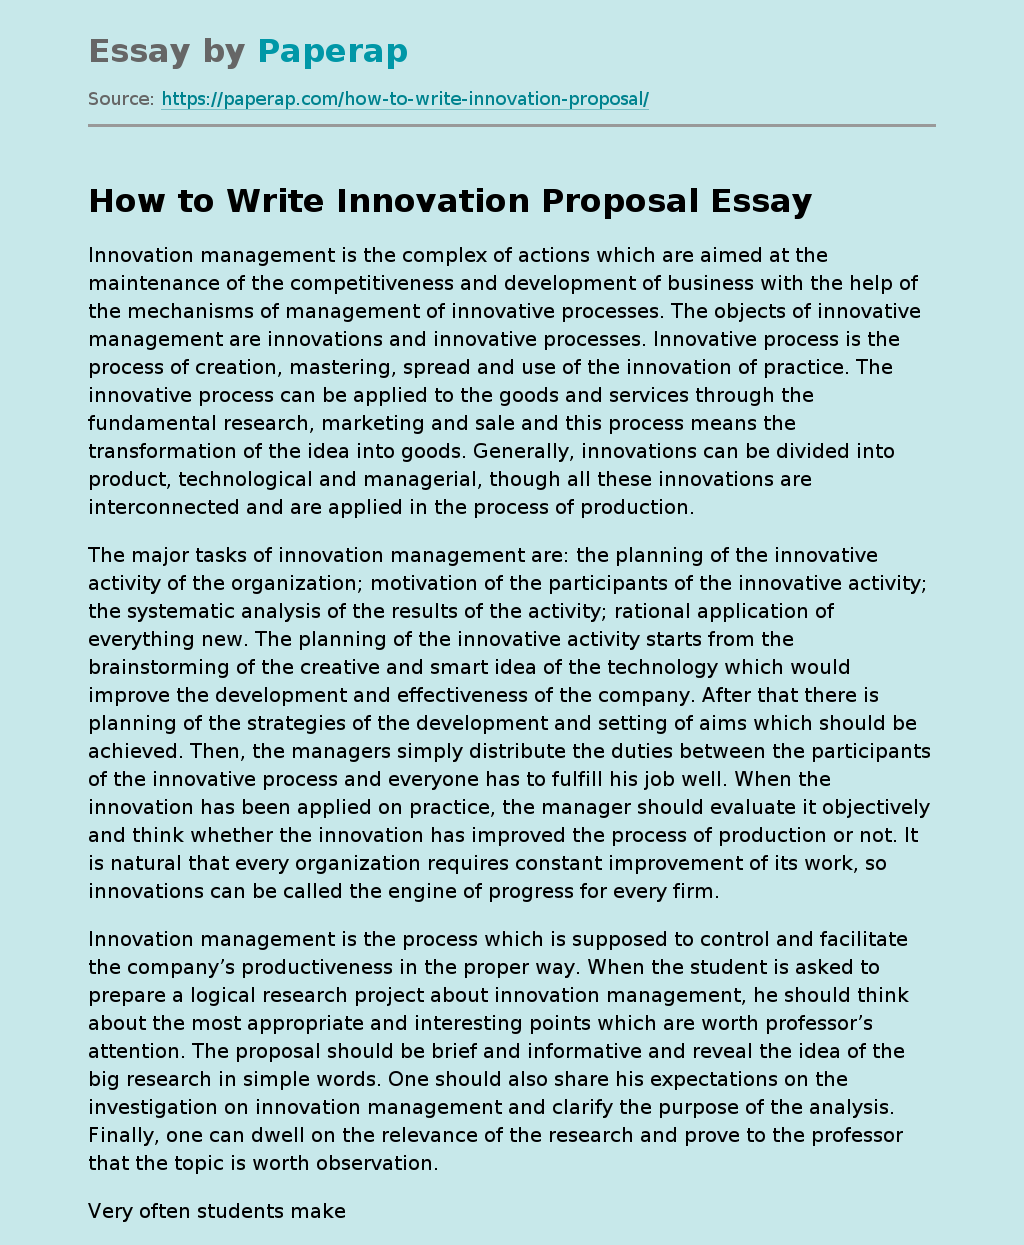 How to Write Innovation Proposal